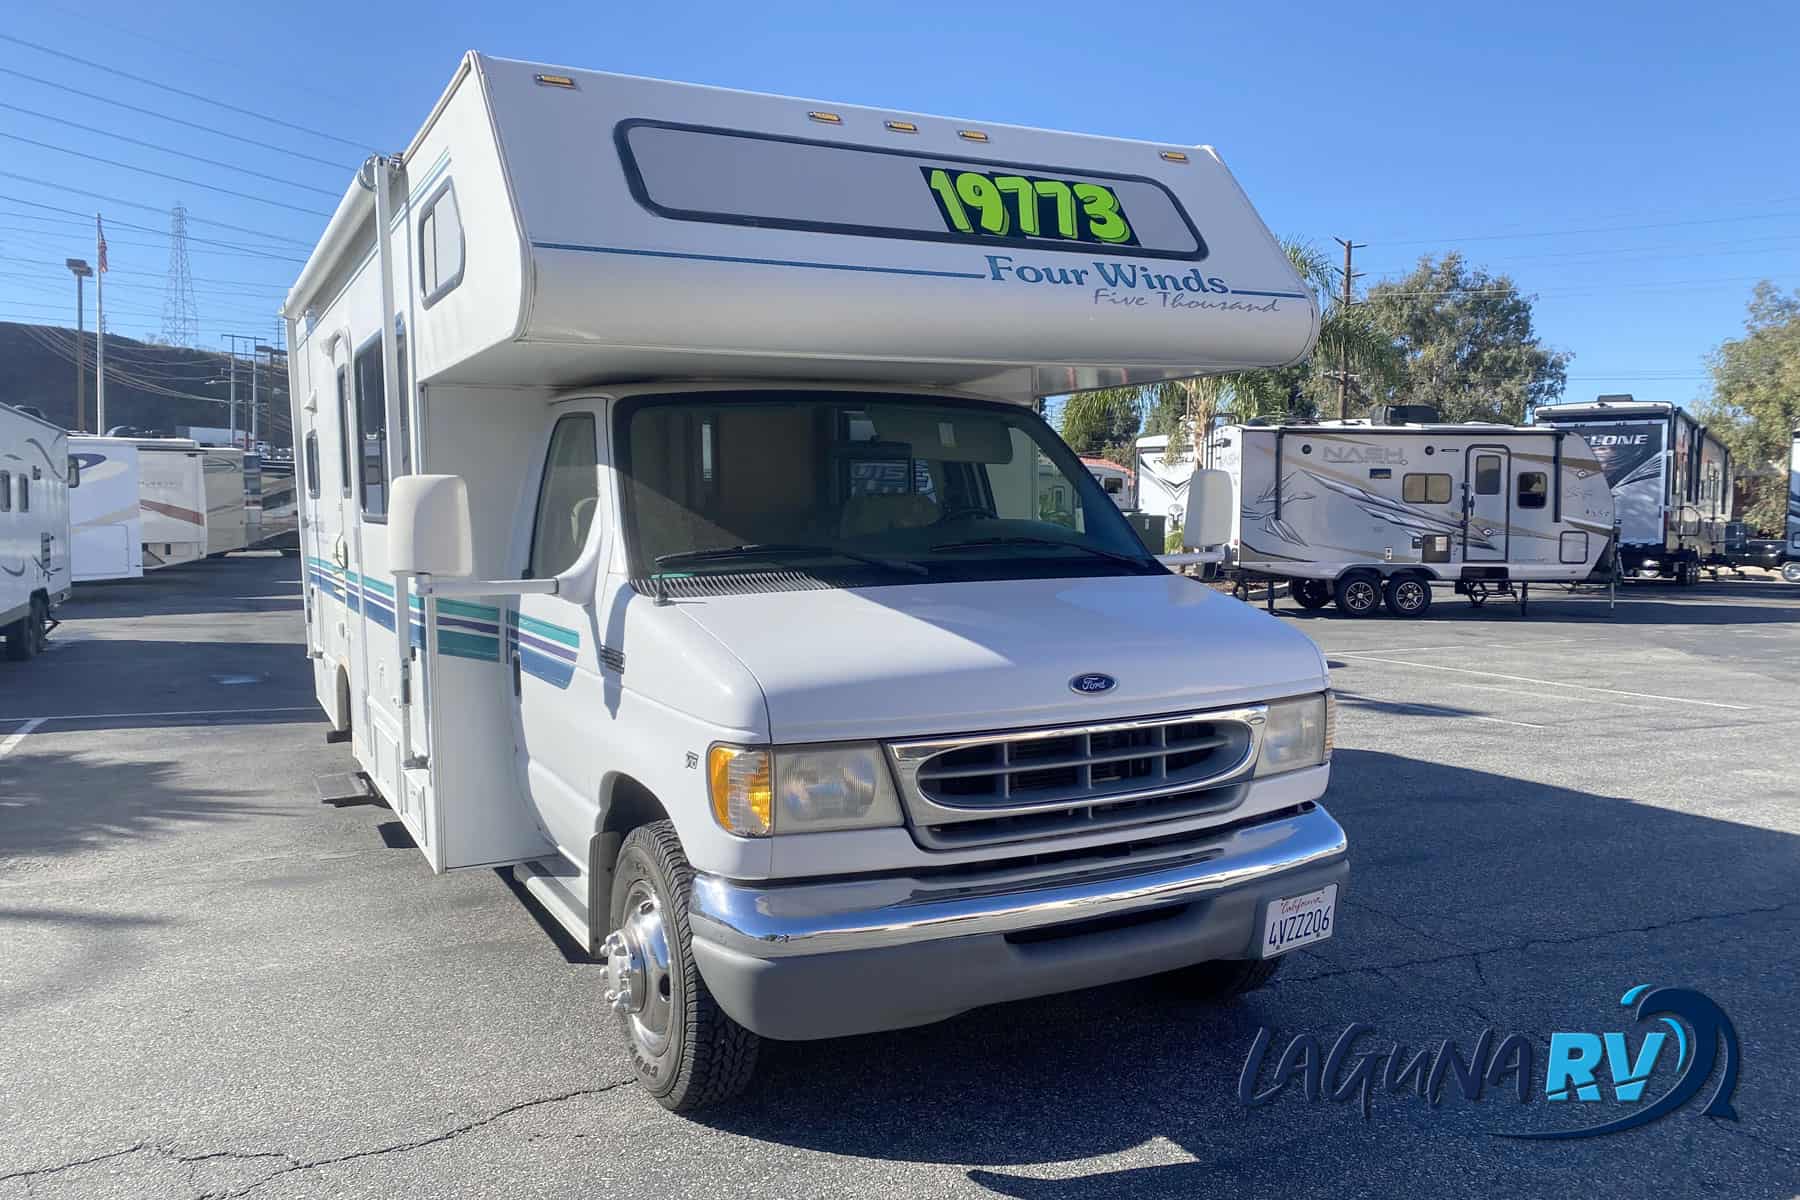 1. Used RV for sale under $5000 on Craigslist - wide 10